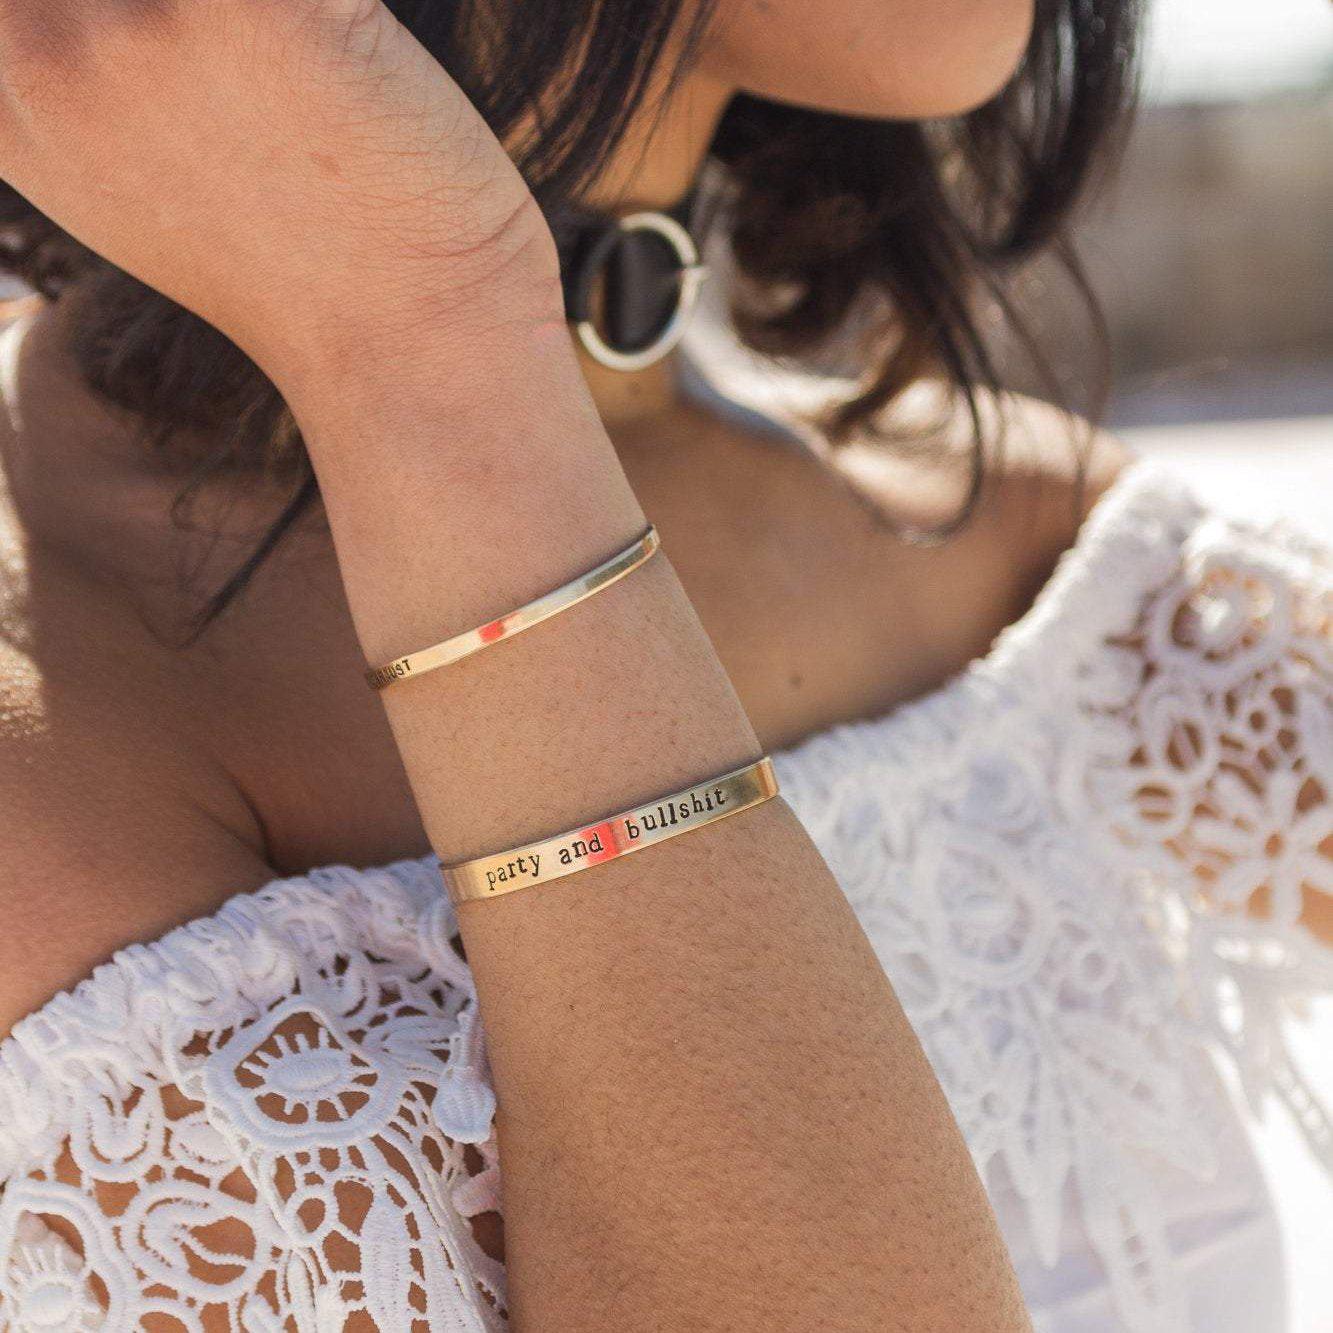 SLAY ALL DAY Stacking Cuff Bracelet Salt and Sparkle